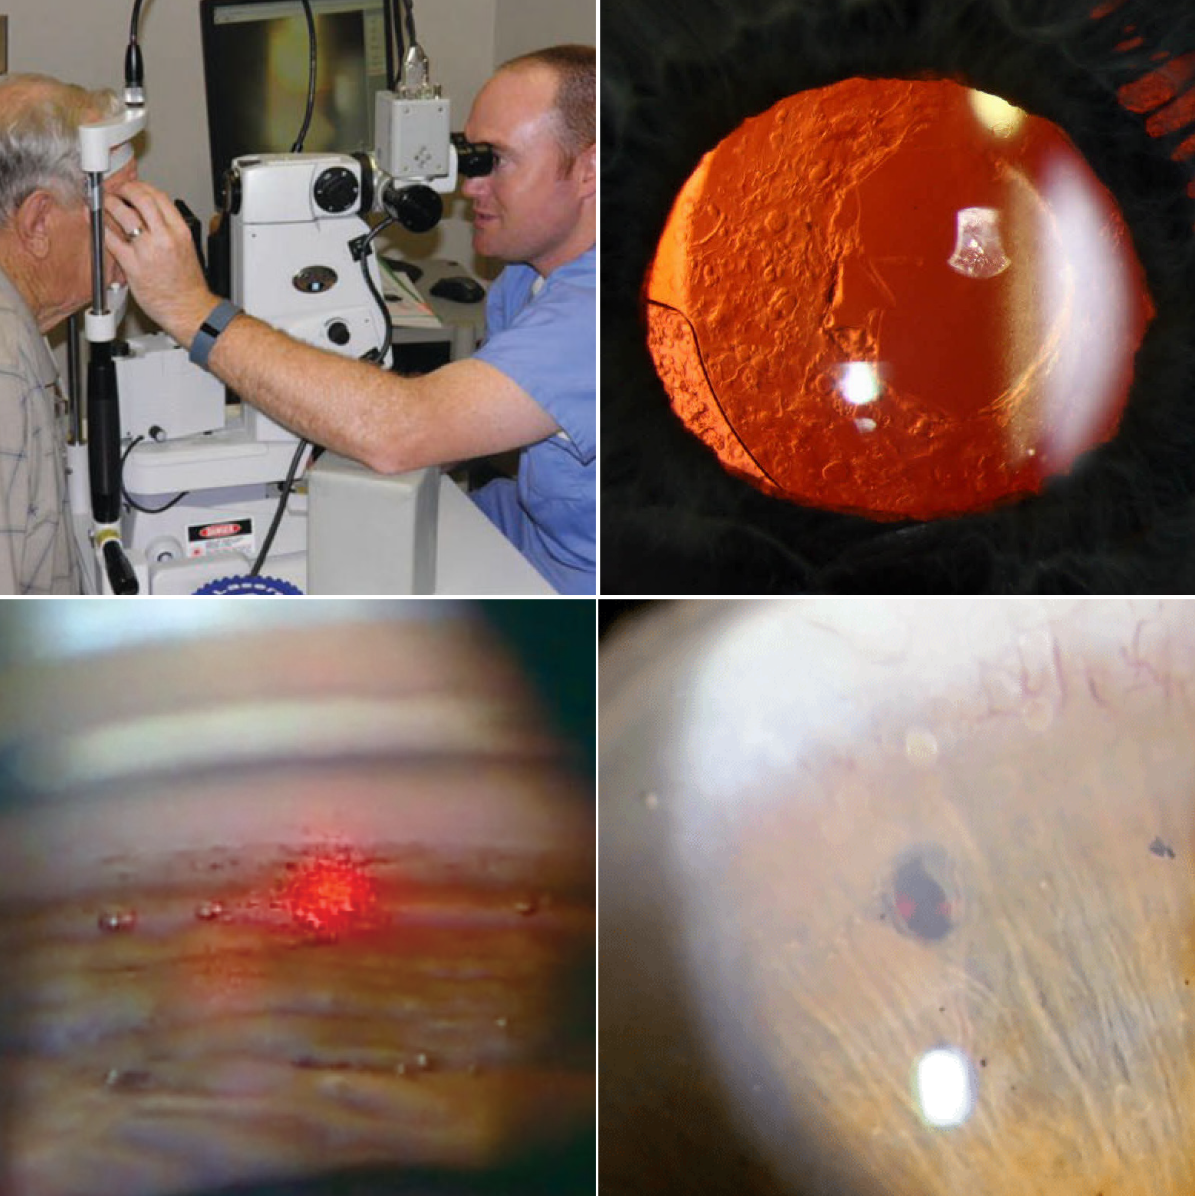 ODs in Virginia can now perform three types of laser surgery